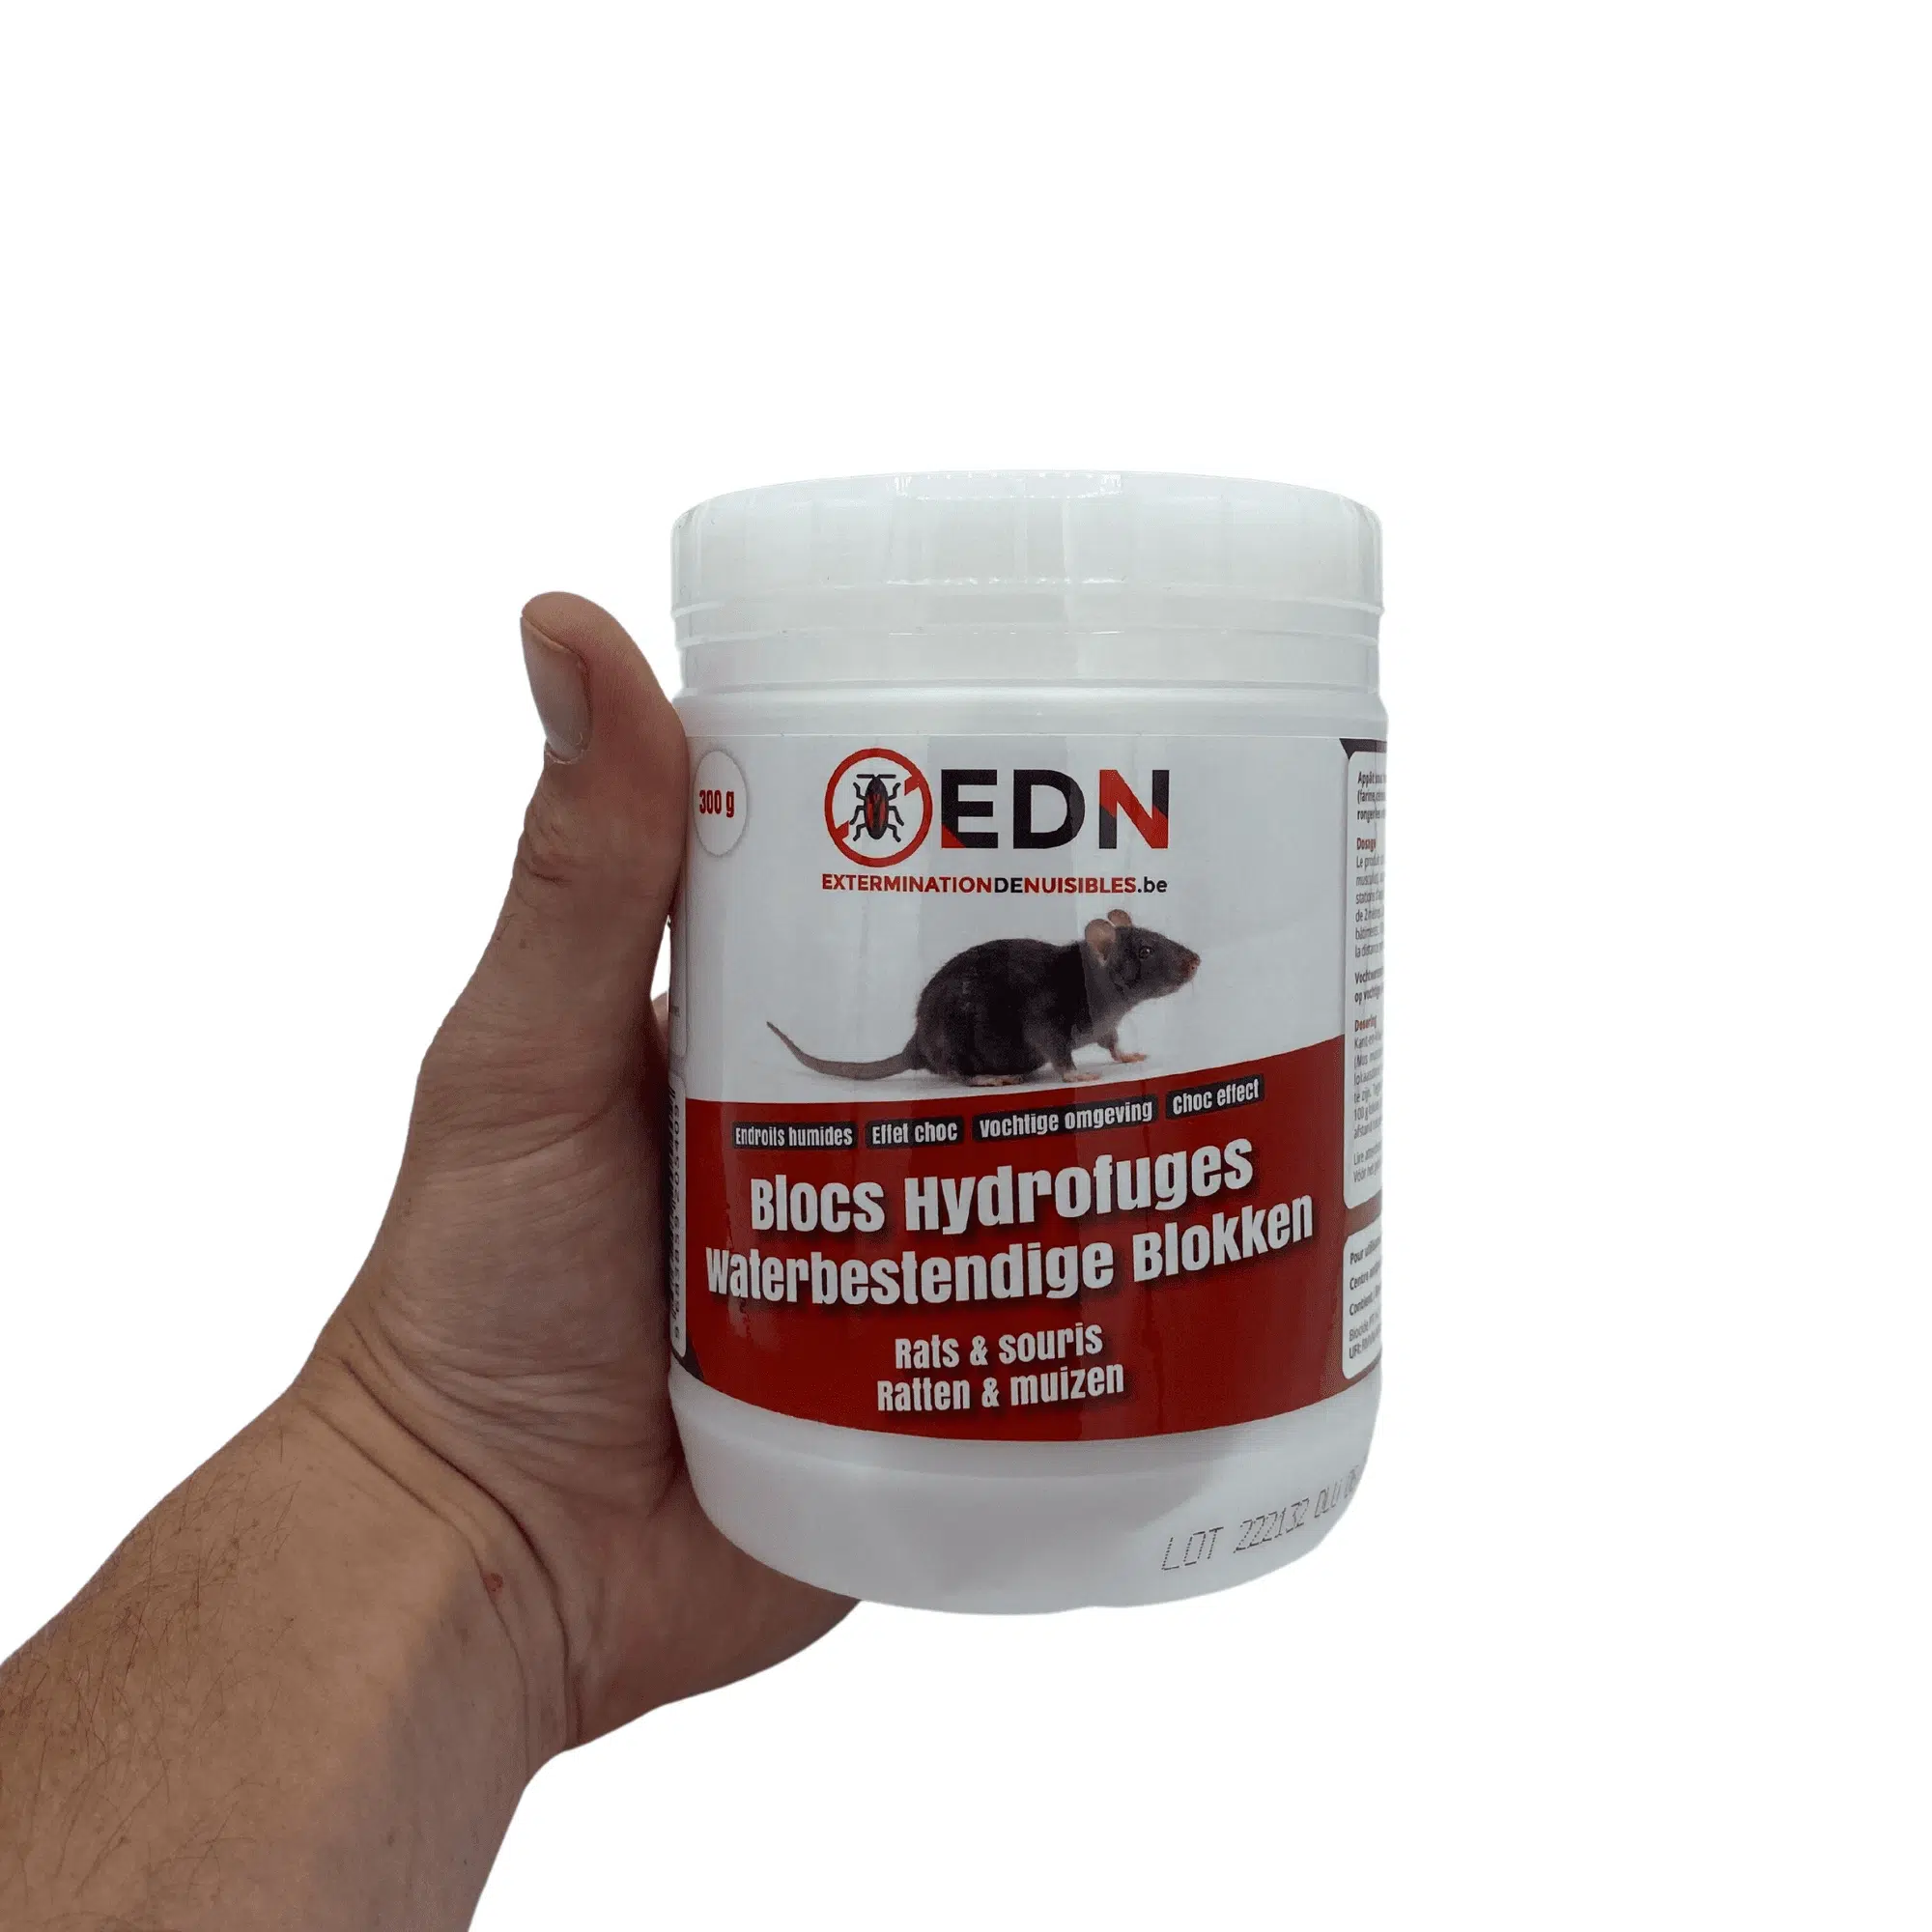 Blocs attractifs hydrofuges anti-rongeurs, 300 g - EDN, EDN